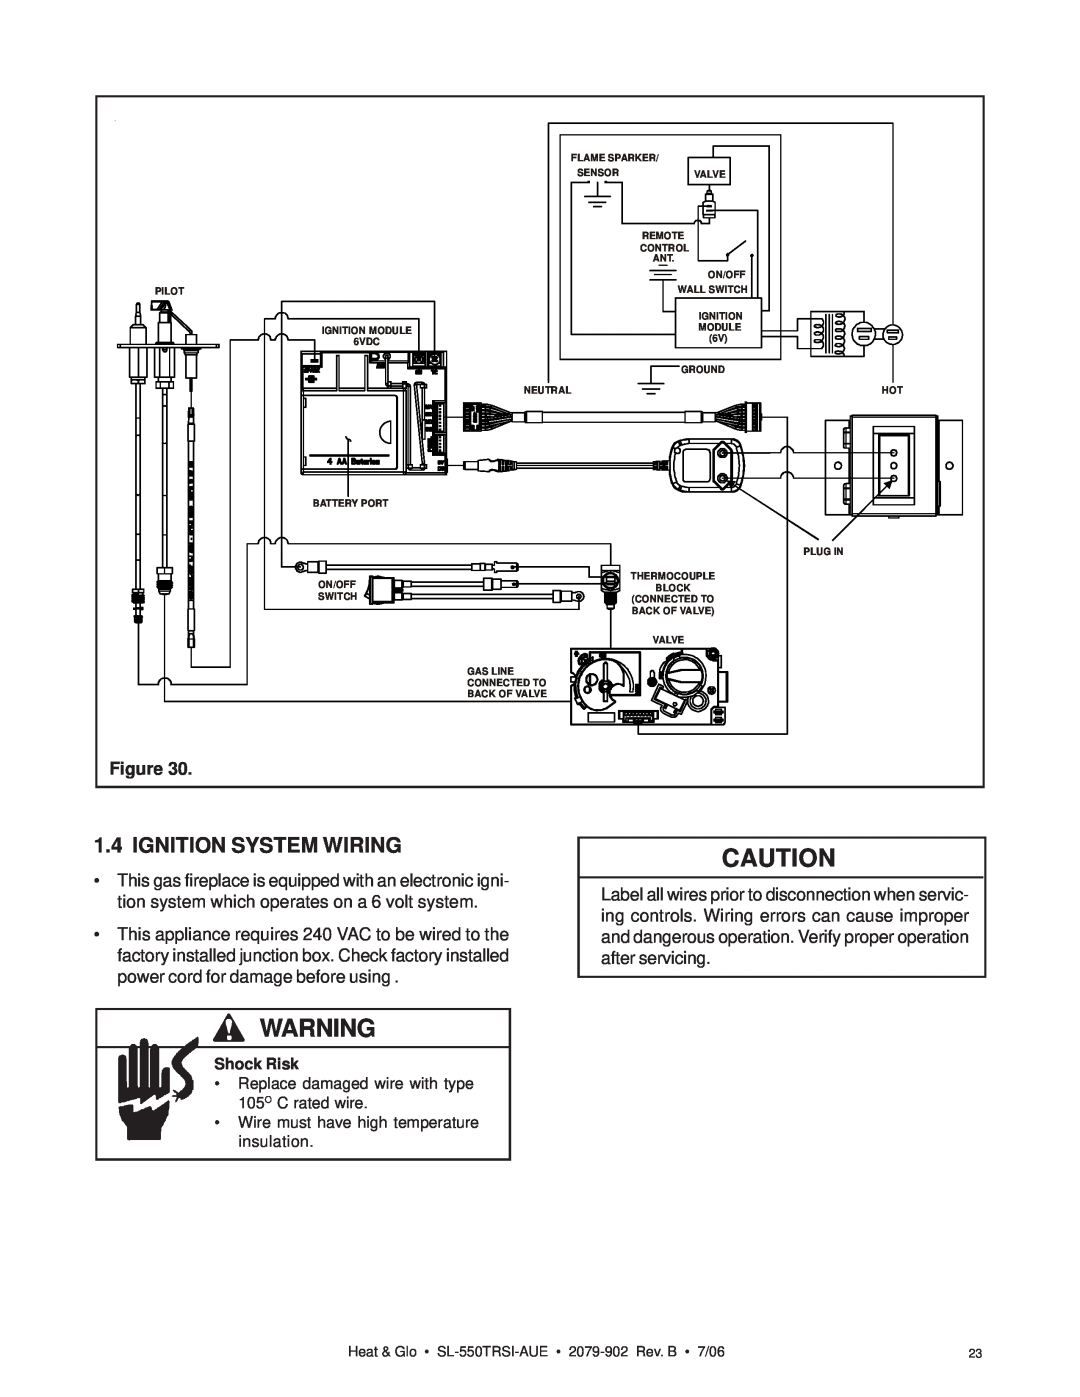 Hearth and Home Technologies SL-550TRSI-AUE manual Ignition System Wiring, Shock Risk 